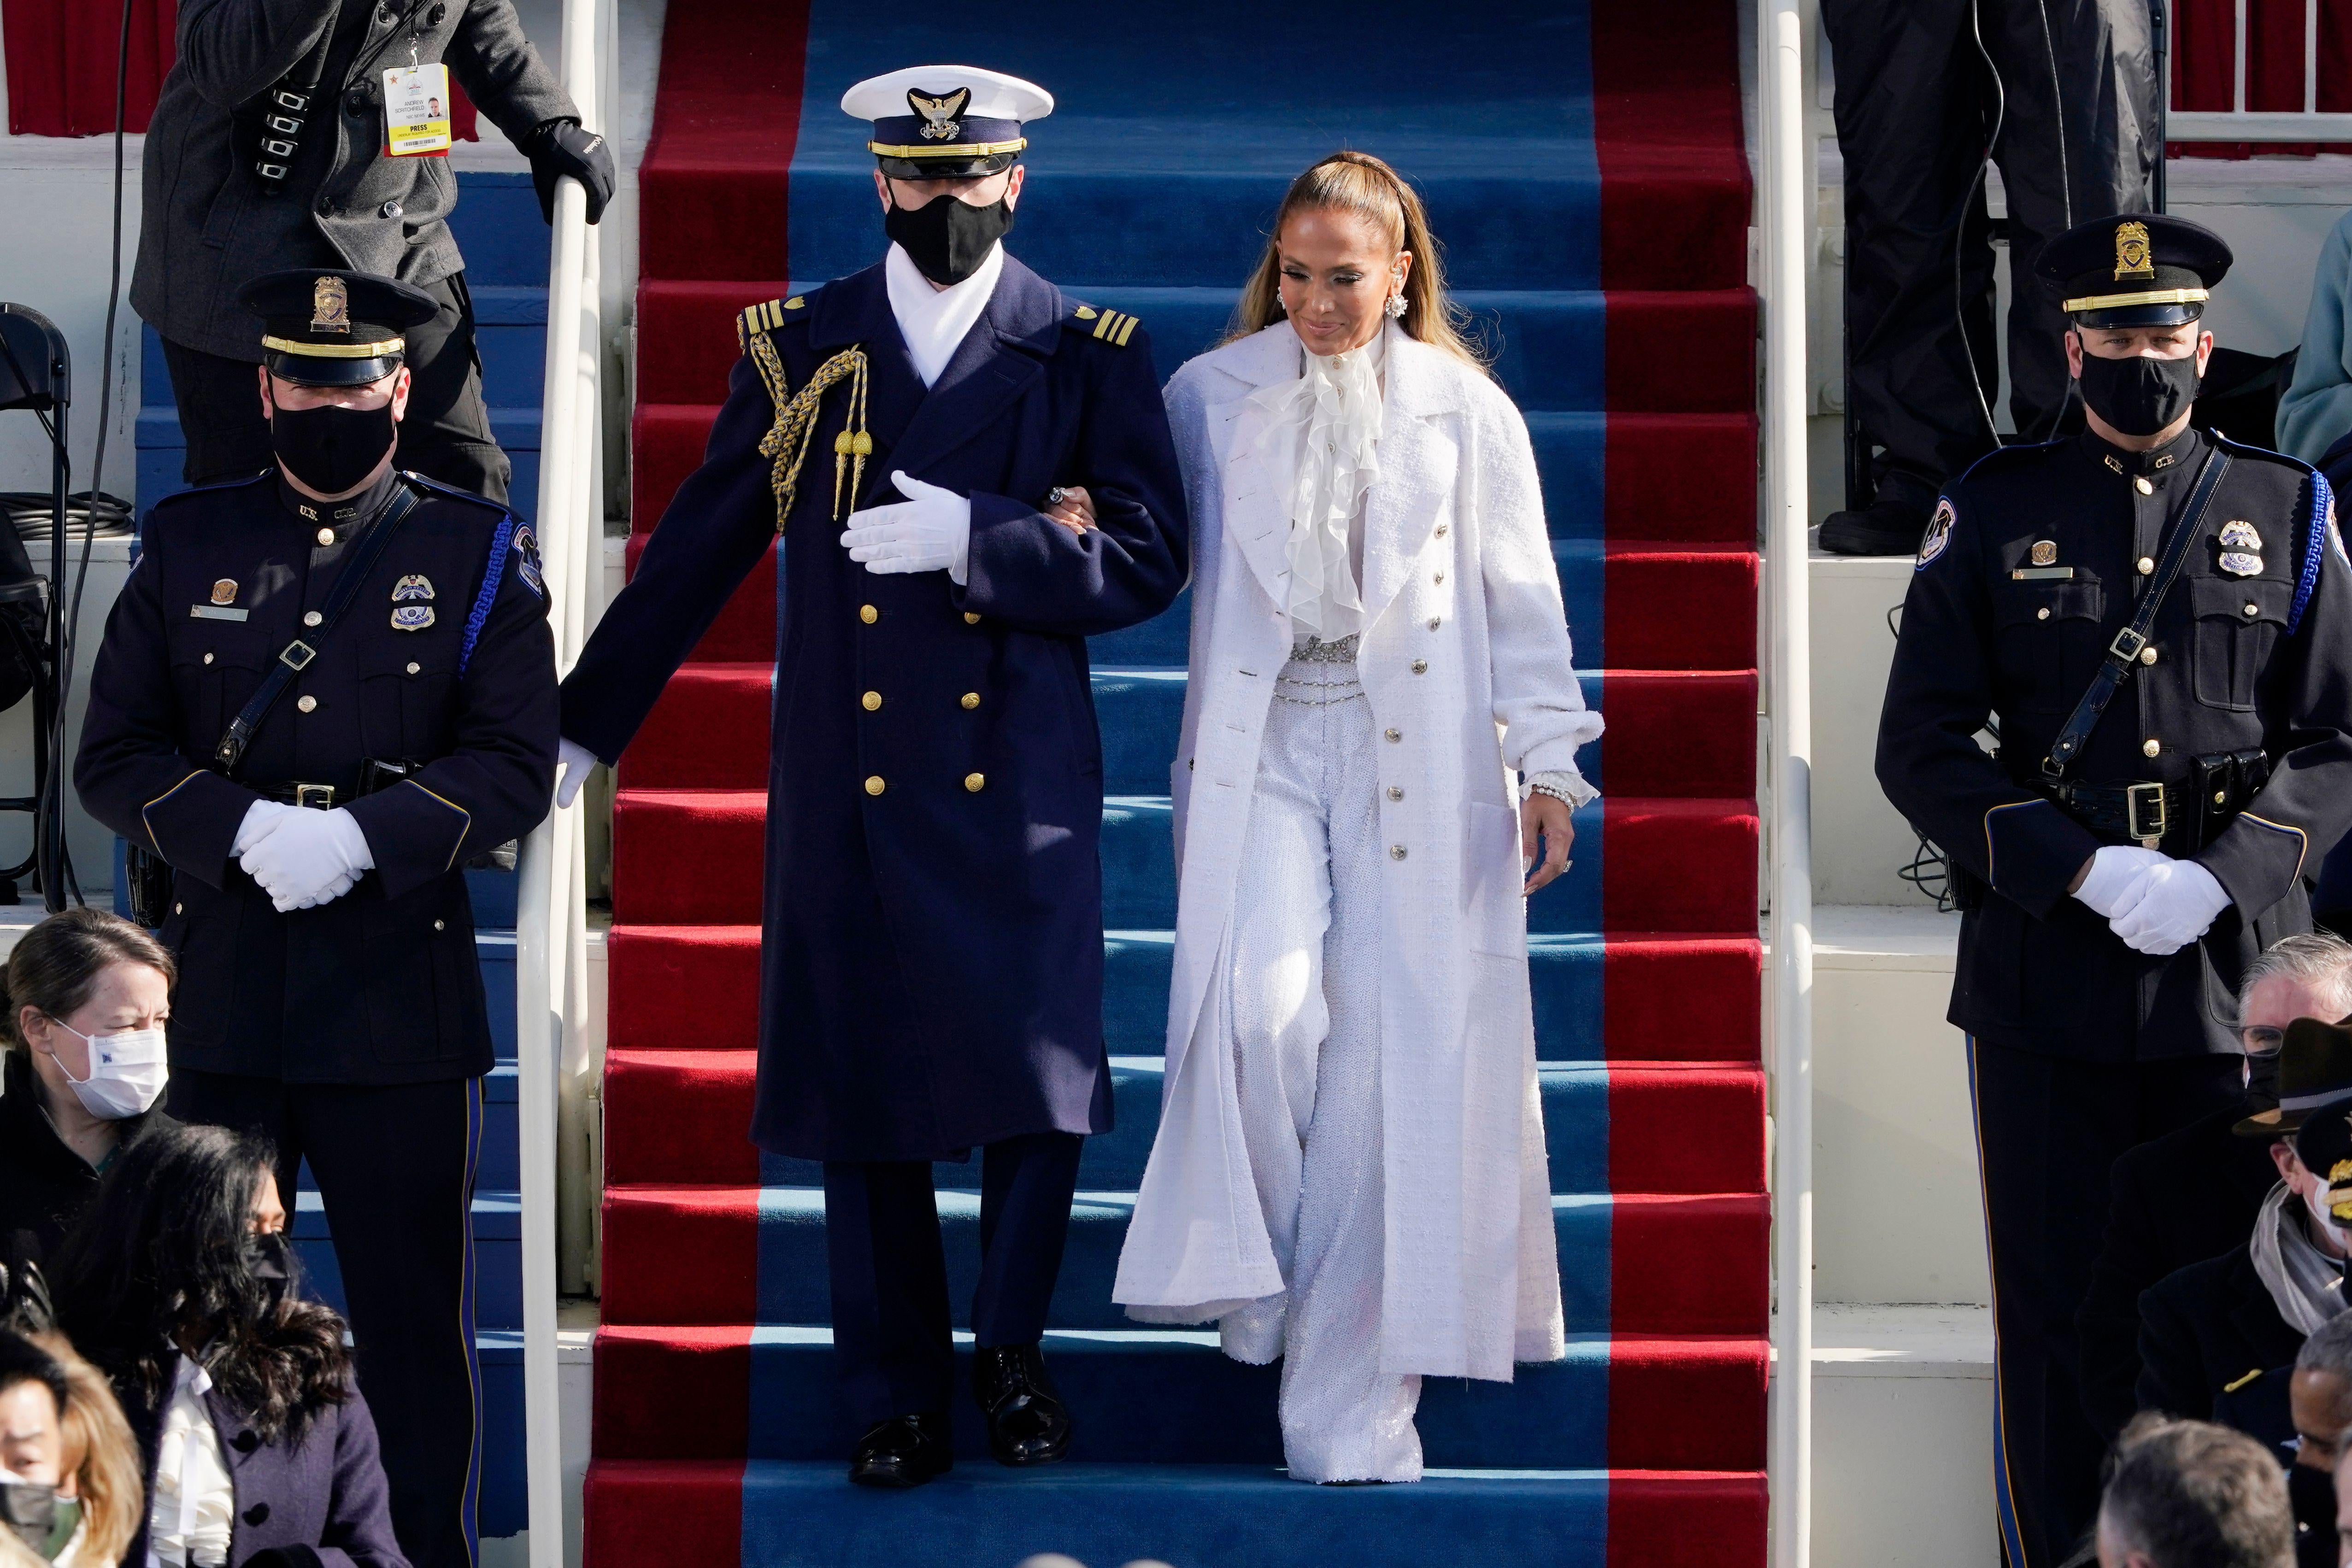 Jennifer Lopez arrives escorted by a member of the military. She wears an all-white outfit with wide-legged pants and a flowy blouse under a long white jacket.